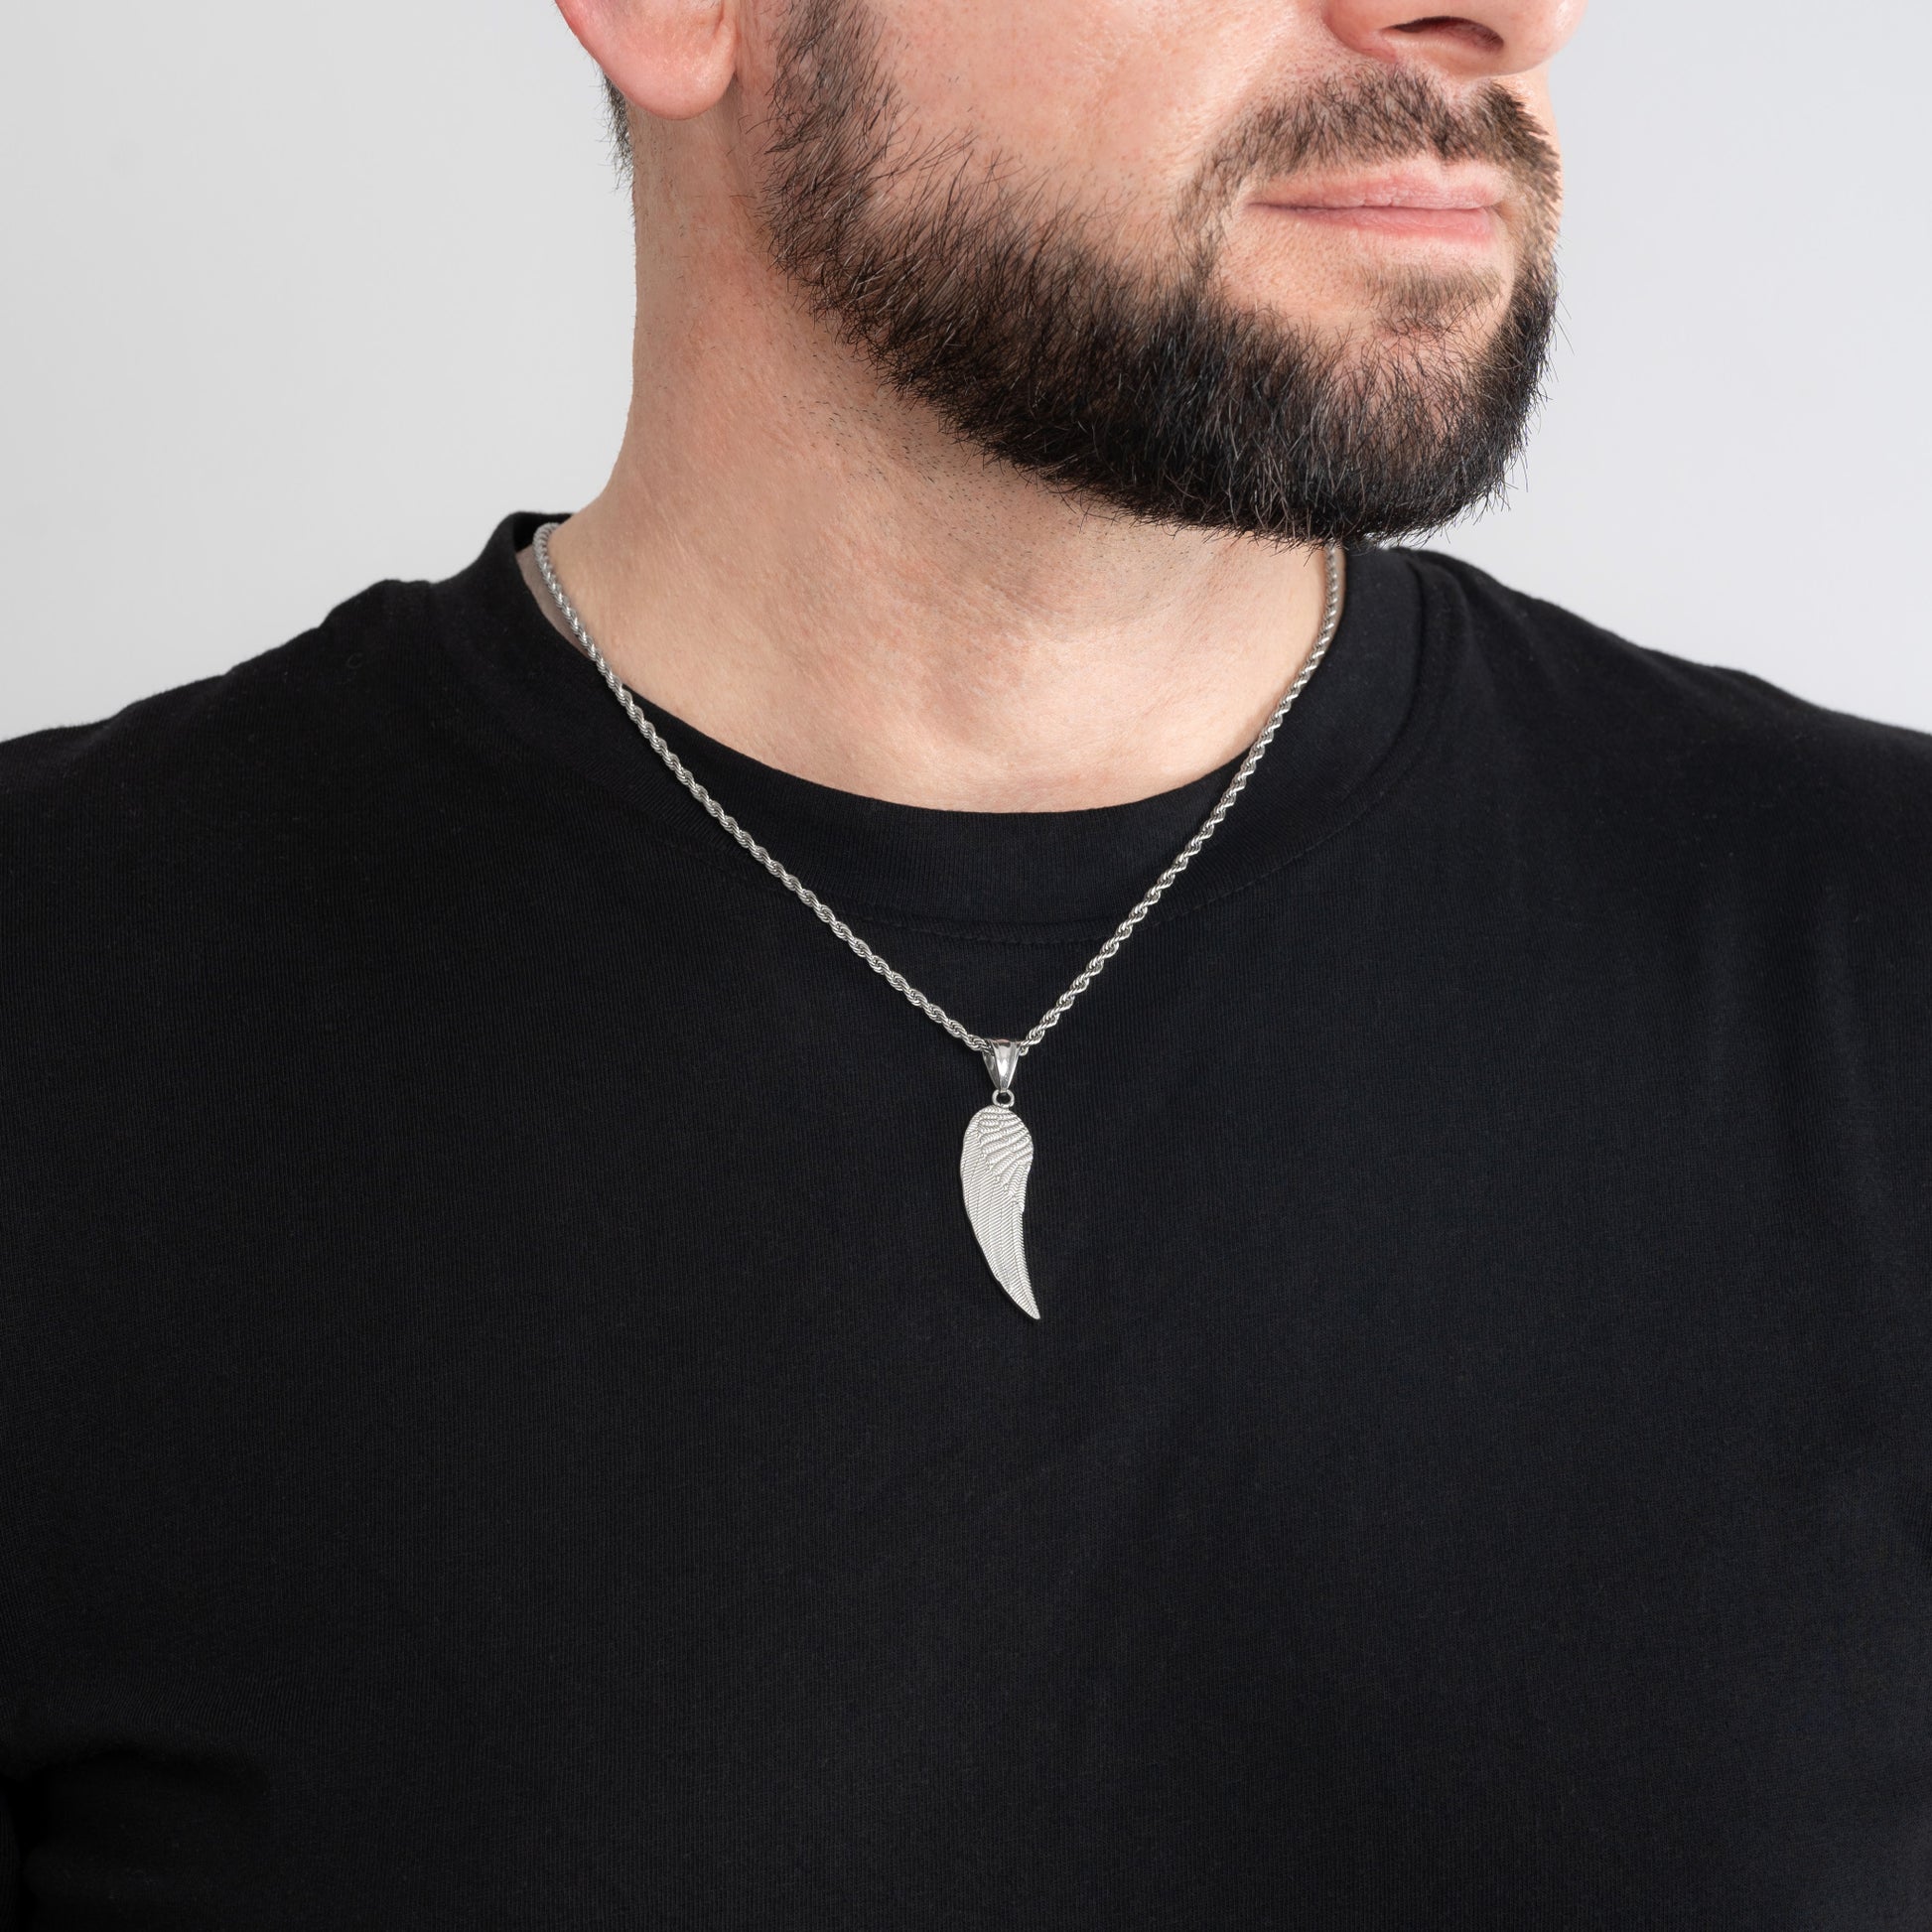 A male model in a black t-shirt wearing an Angel Wing Silver Pendant with a 3mm Silver Rope chain 22 inches.